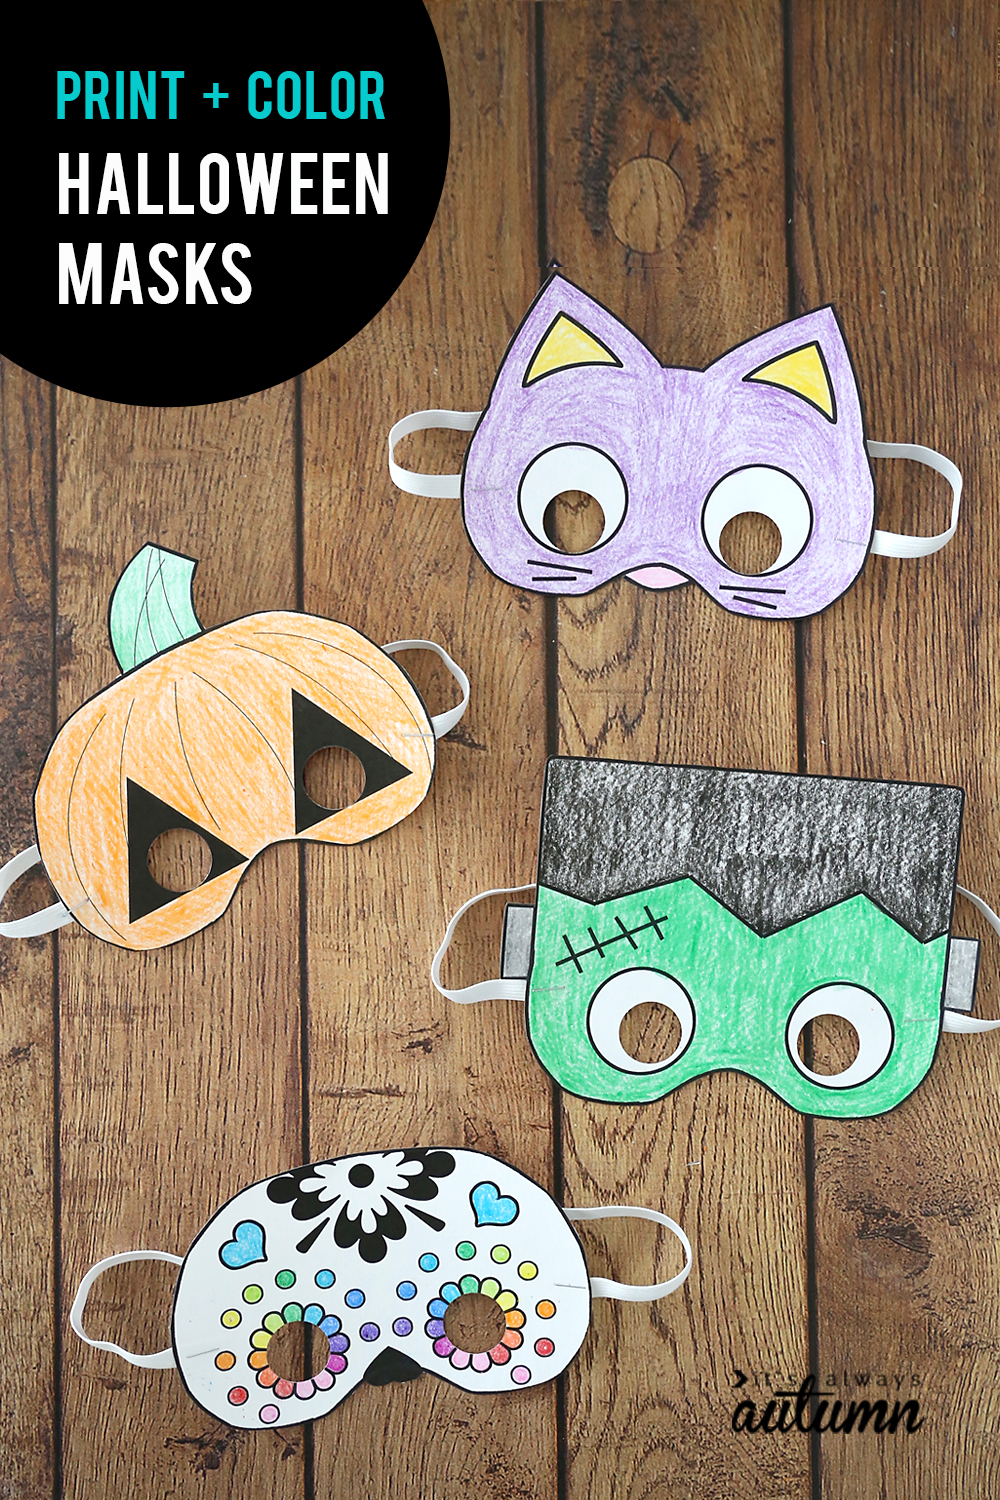 Halloween Masks To Print And Color It s Always Autumn